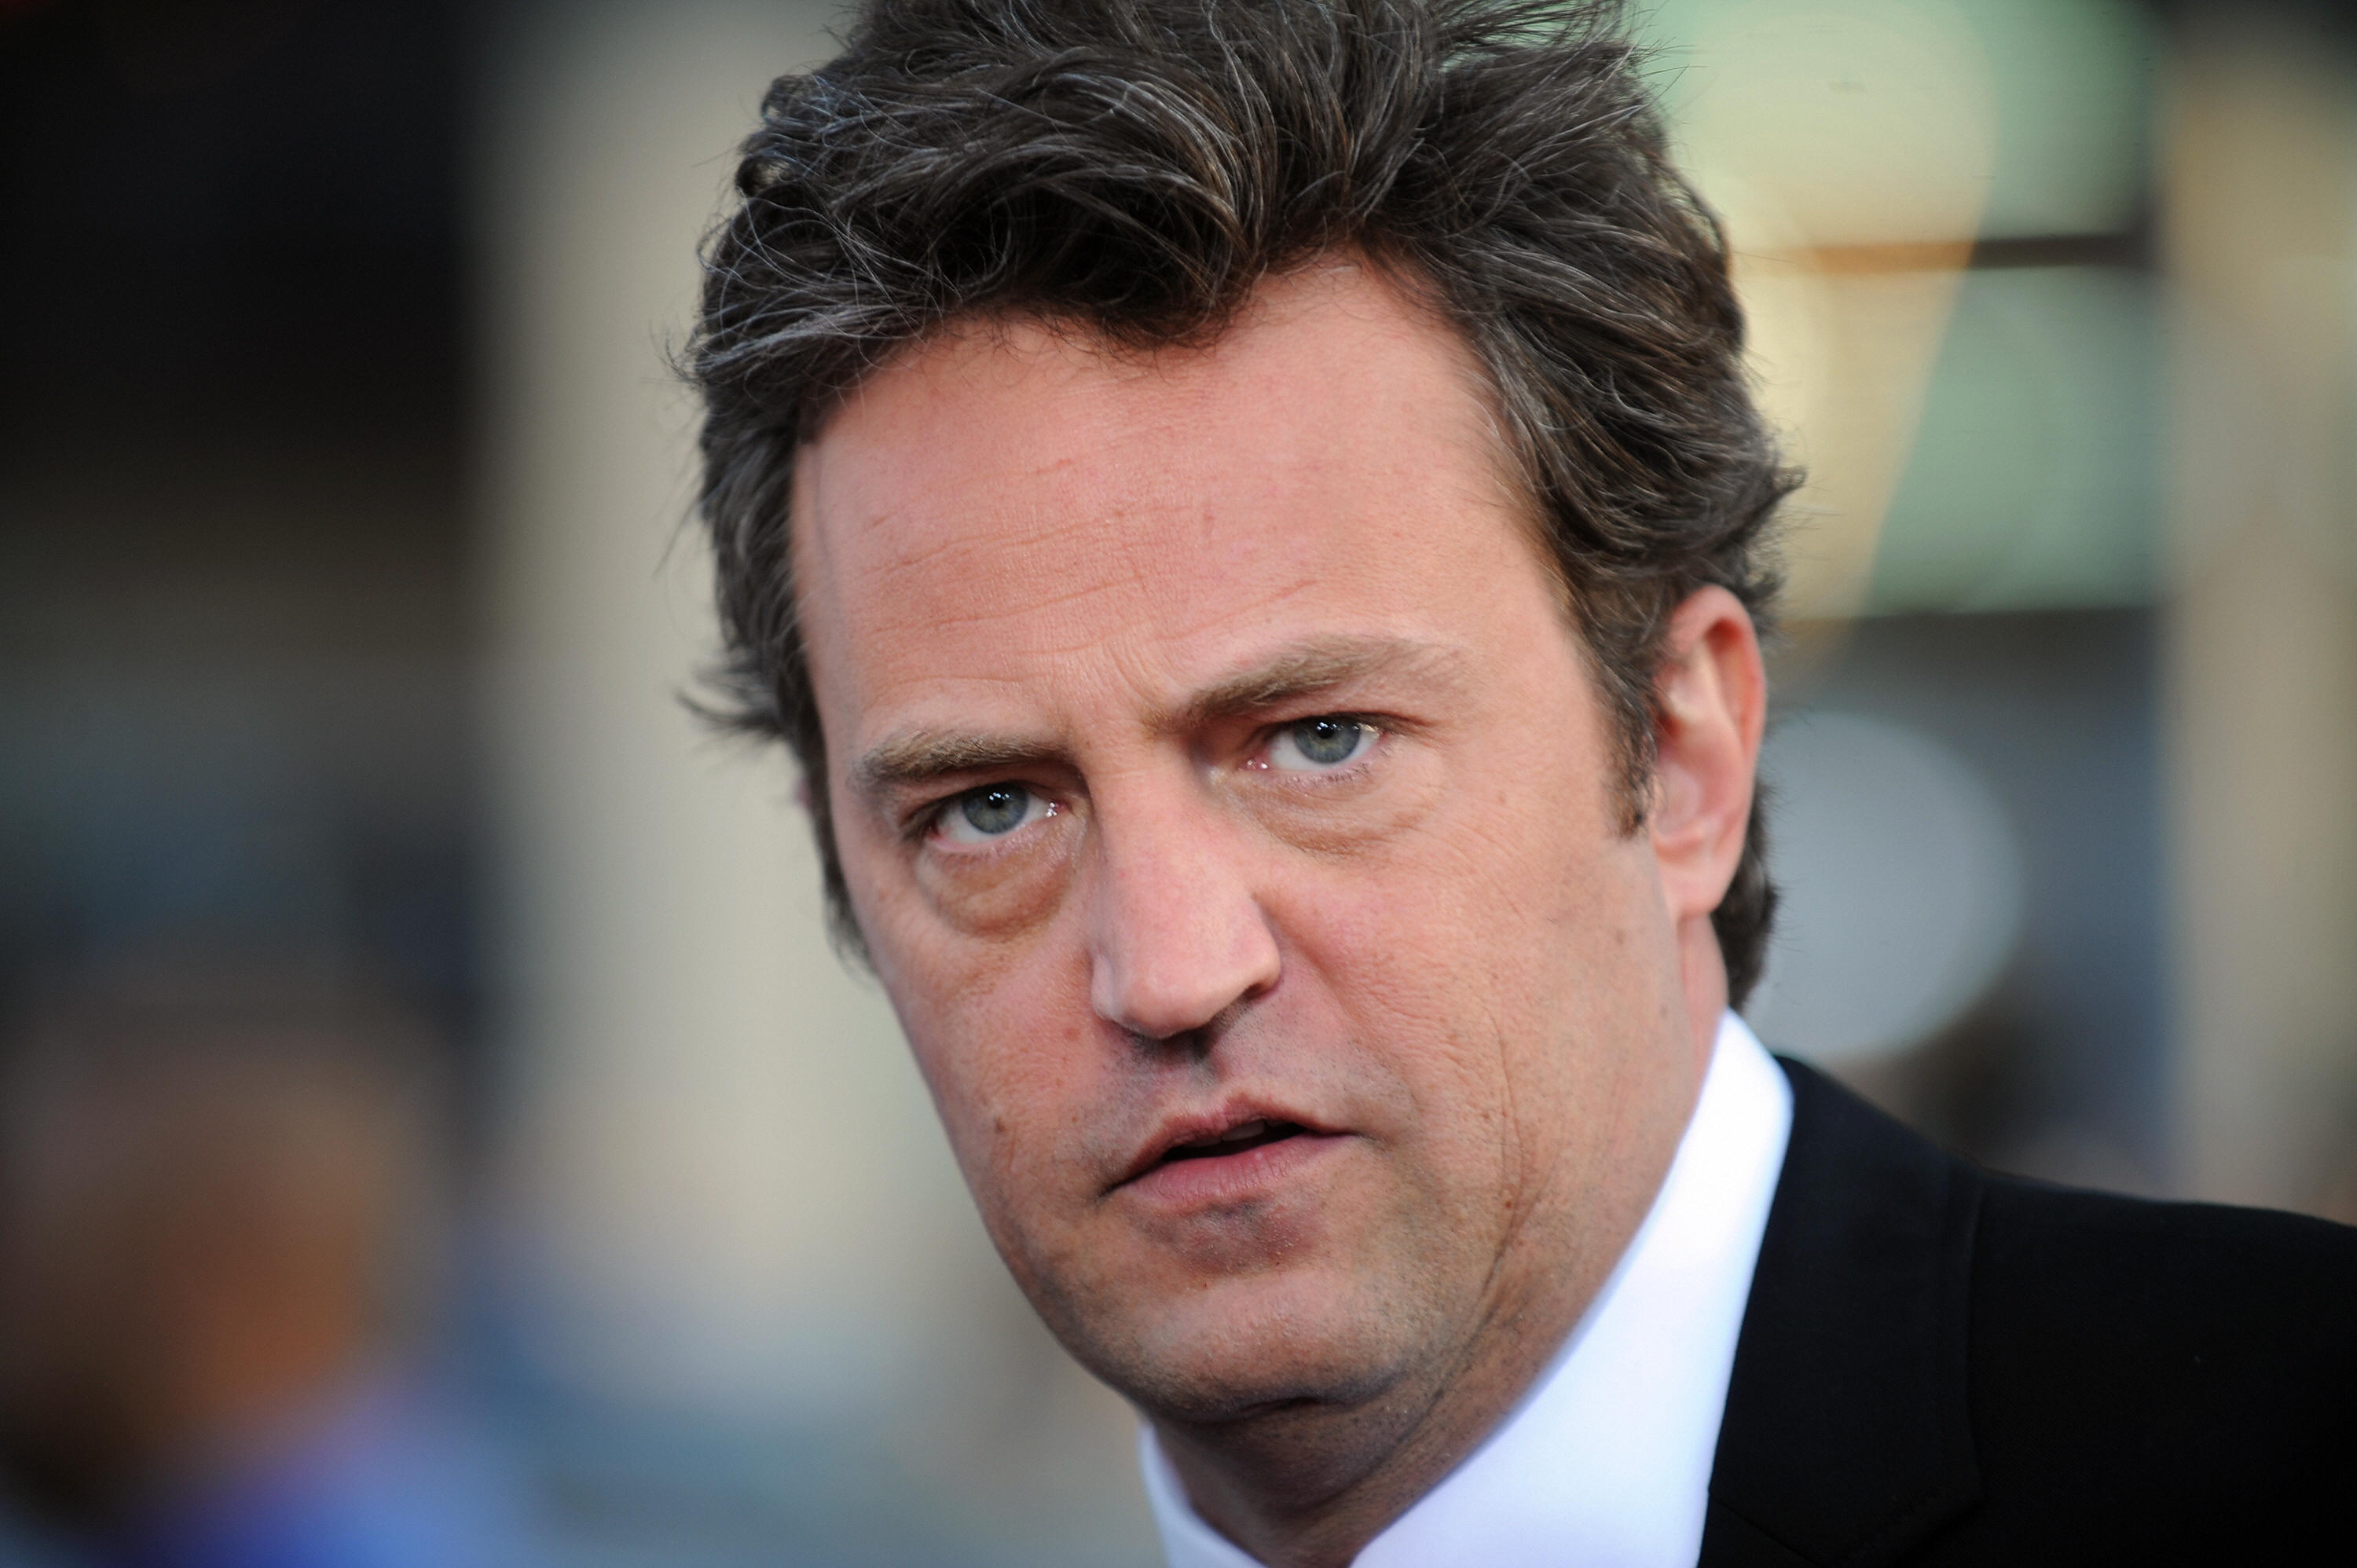 Actor Matthew Perry arrives at the Los Angeles premiere of 17 Again at the Grauman's Chinese Theater in Hollywood, California, April 14, 2009. AFP PHOTO / GABRIEL BOUYS | Source: Getty Images)